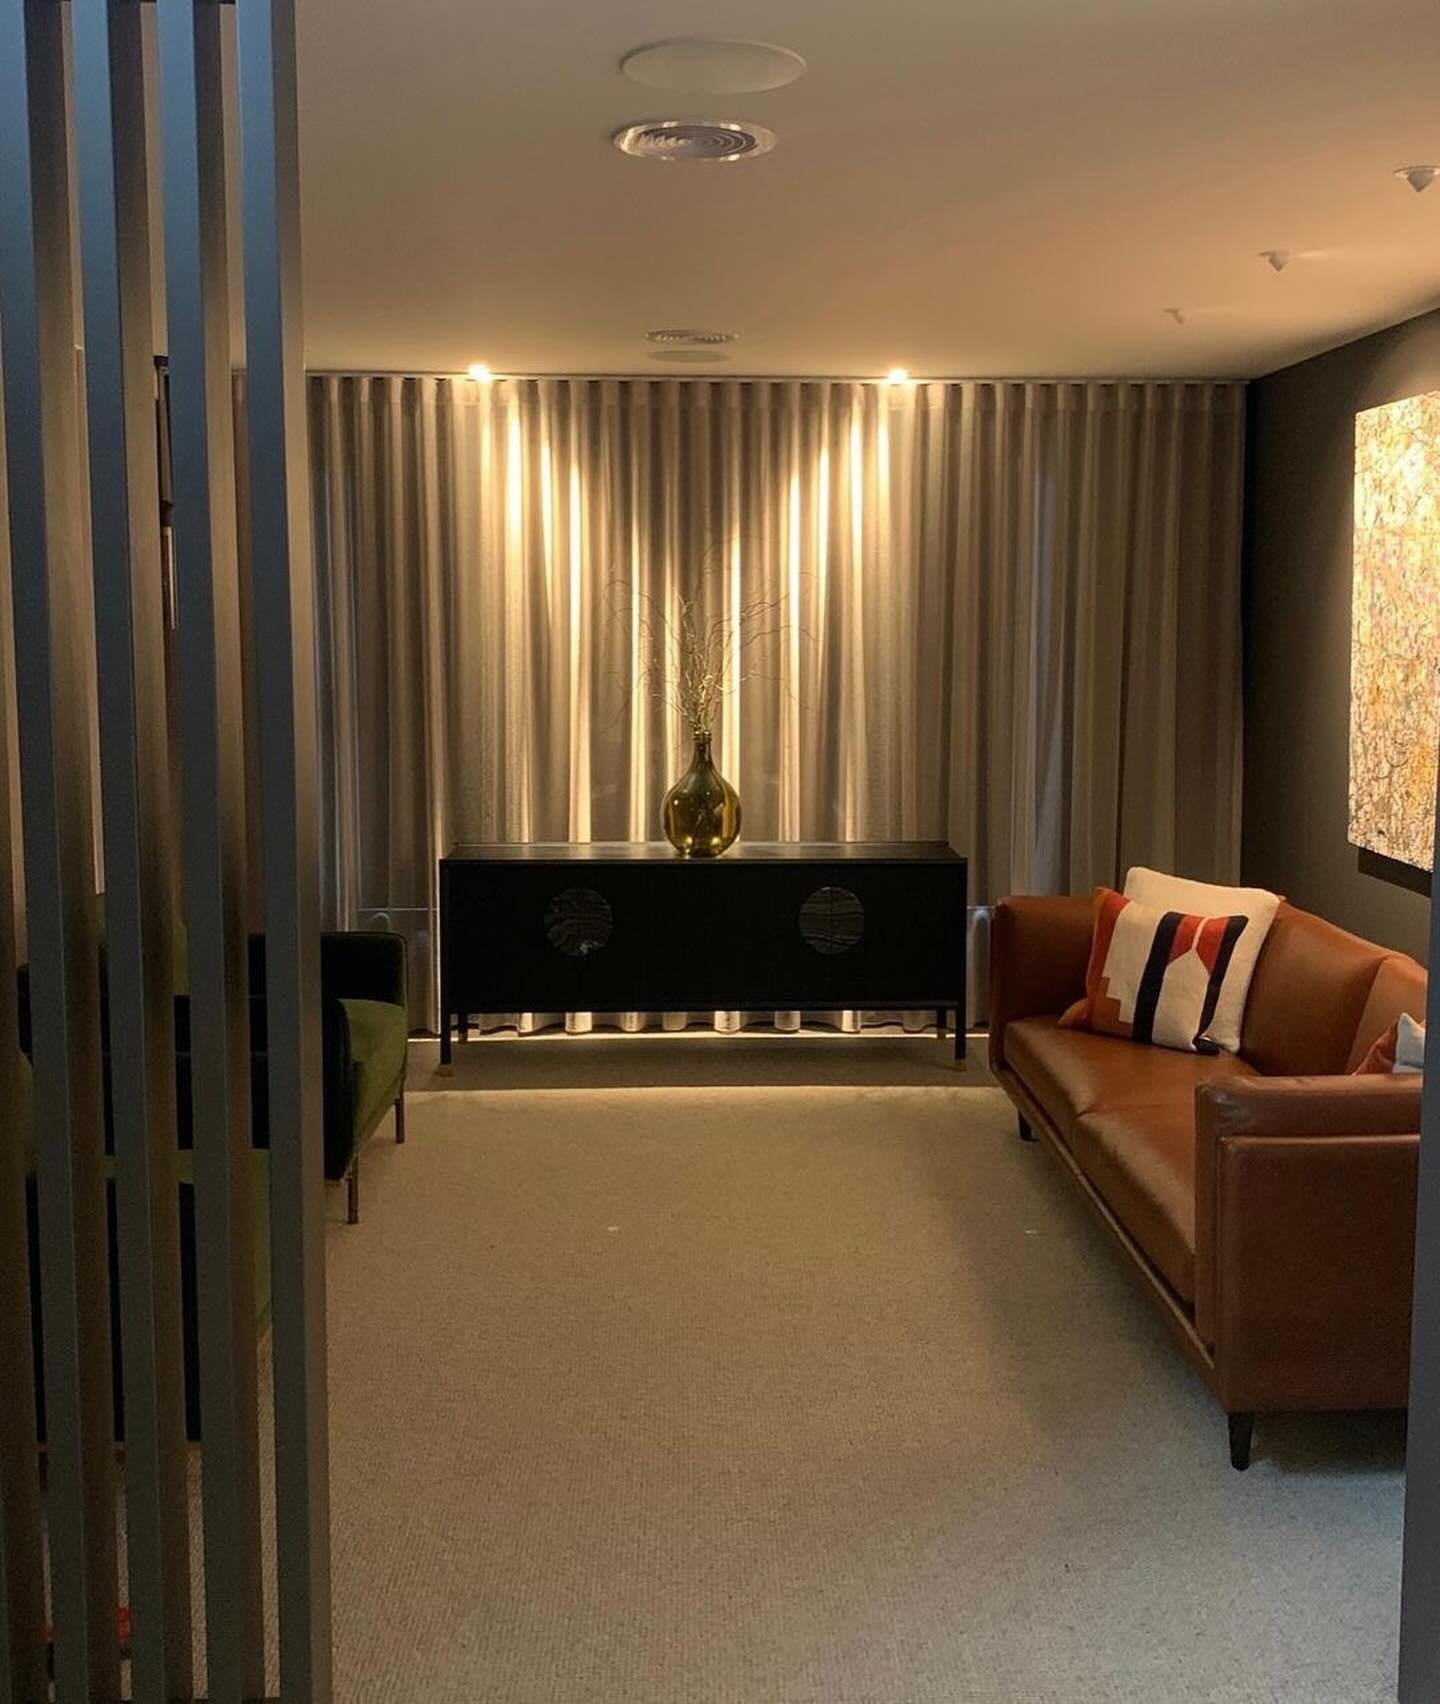 Accent Lighting adds plenty of drama while creating visual interest throughout our Stone House Project, this directional lighting highlights and draws the eye to many areas and objects in the home.
And the quality of the materials used for this home 